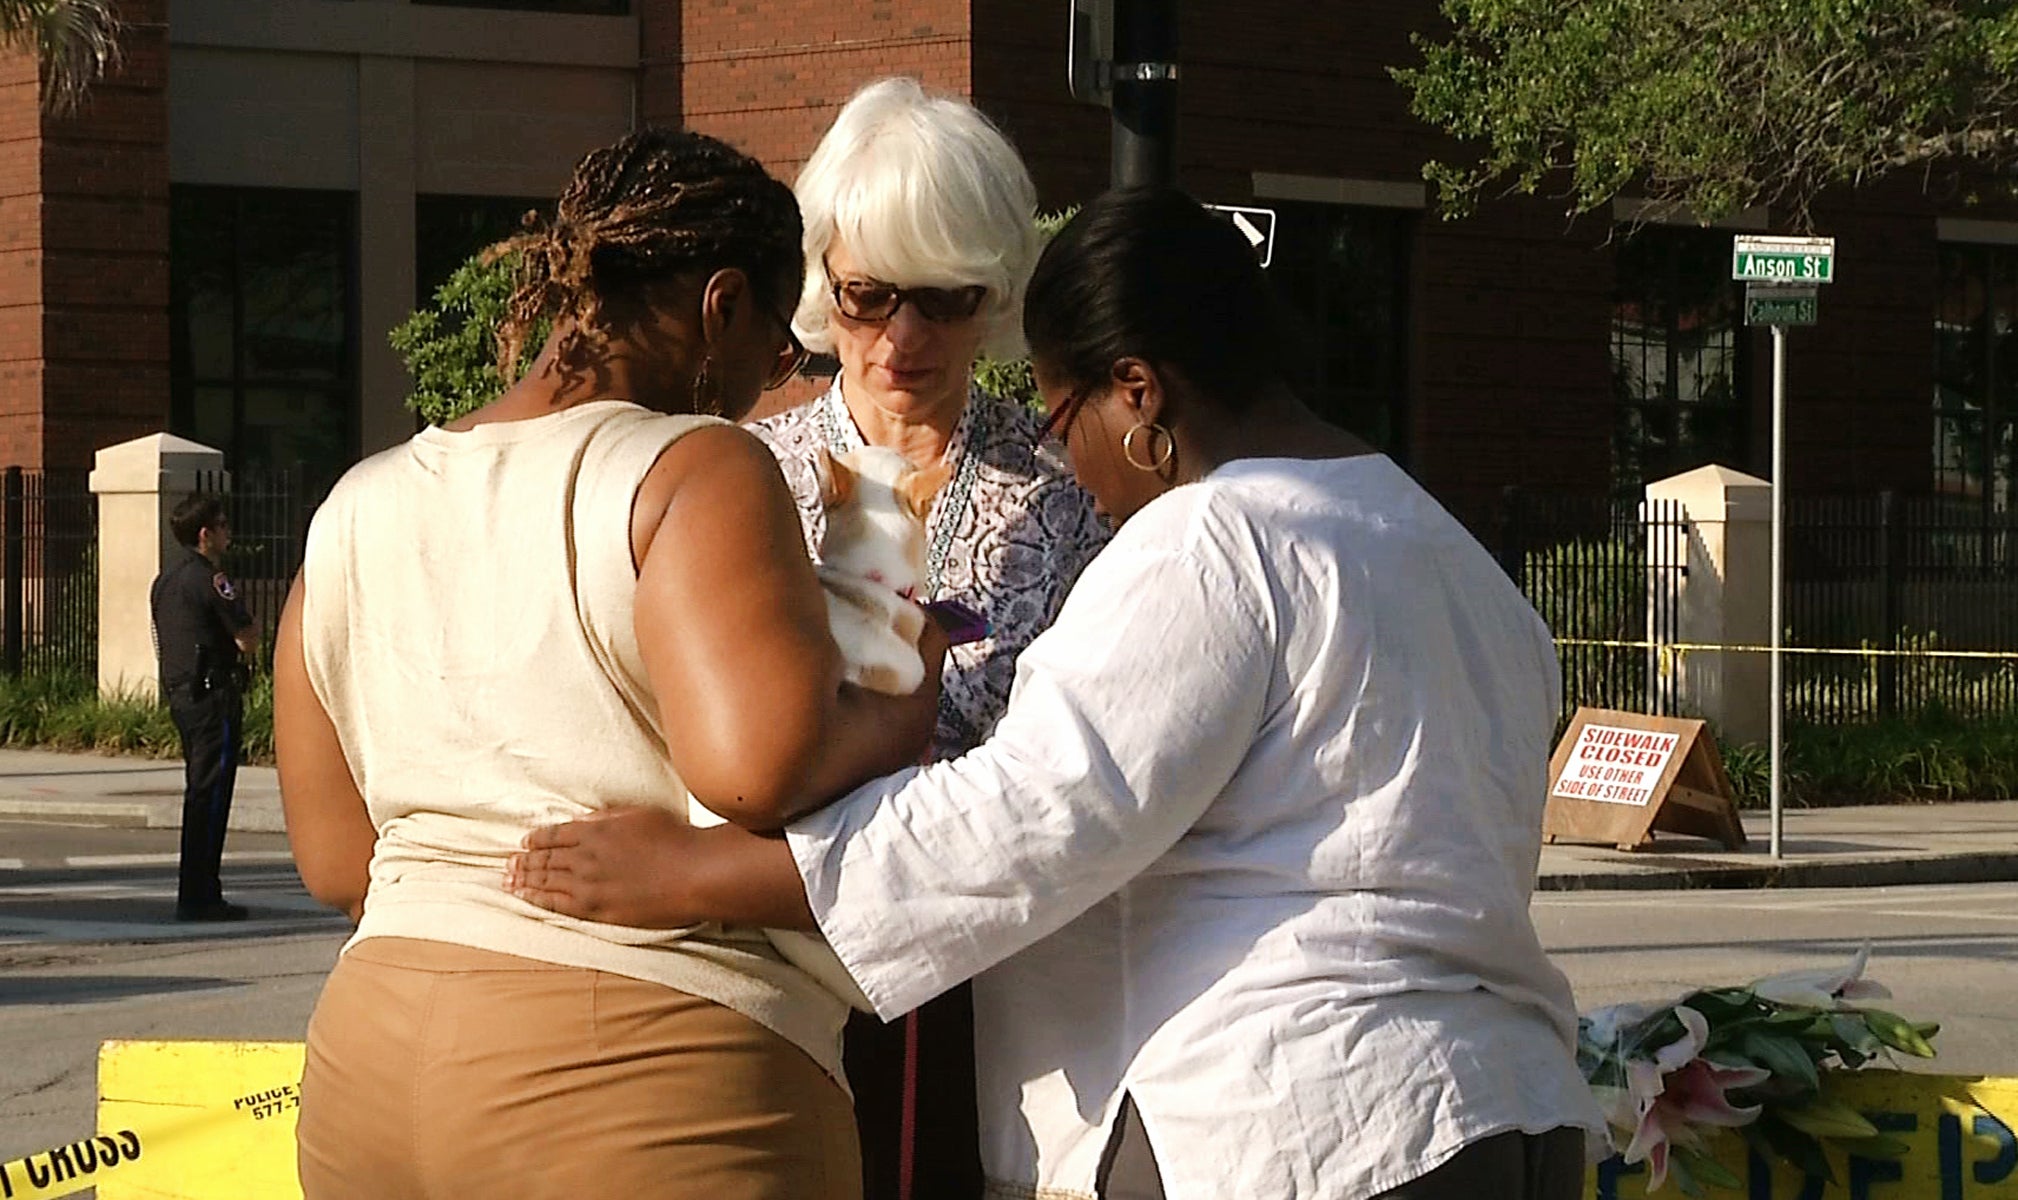 Remembering Charleston: Photos from the Tragedy at Mother Emanuel
